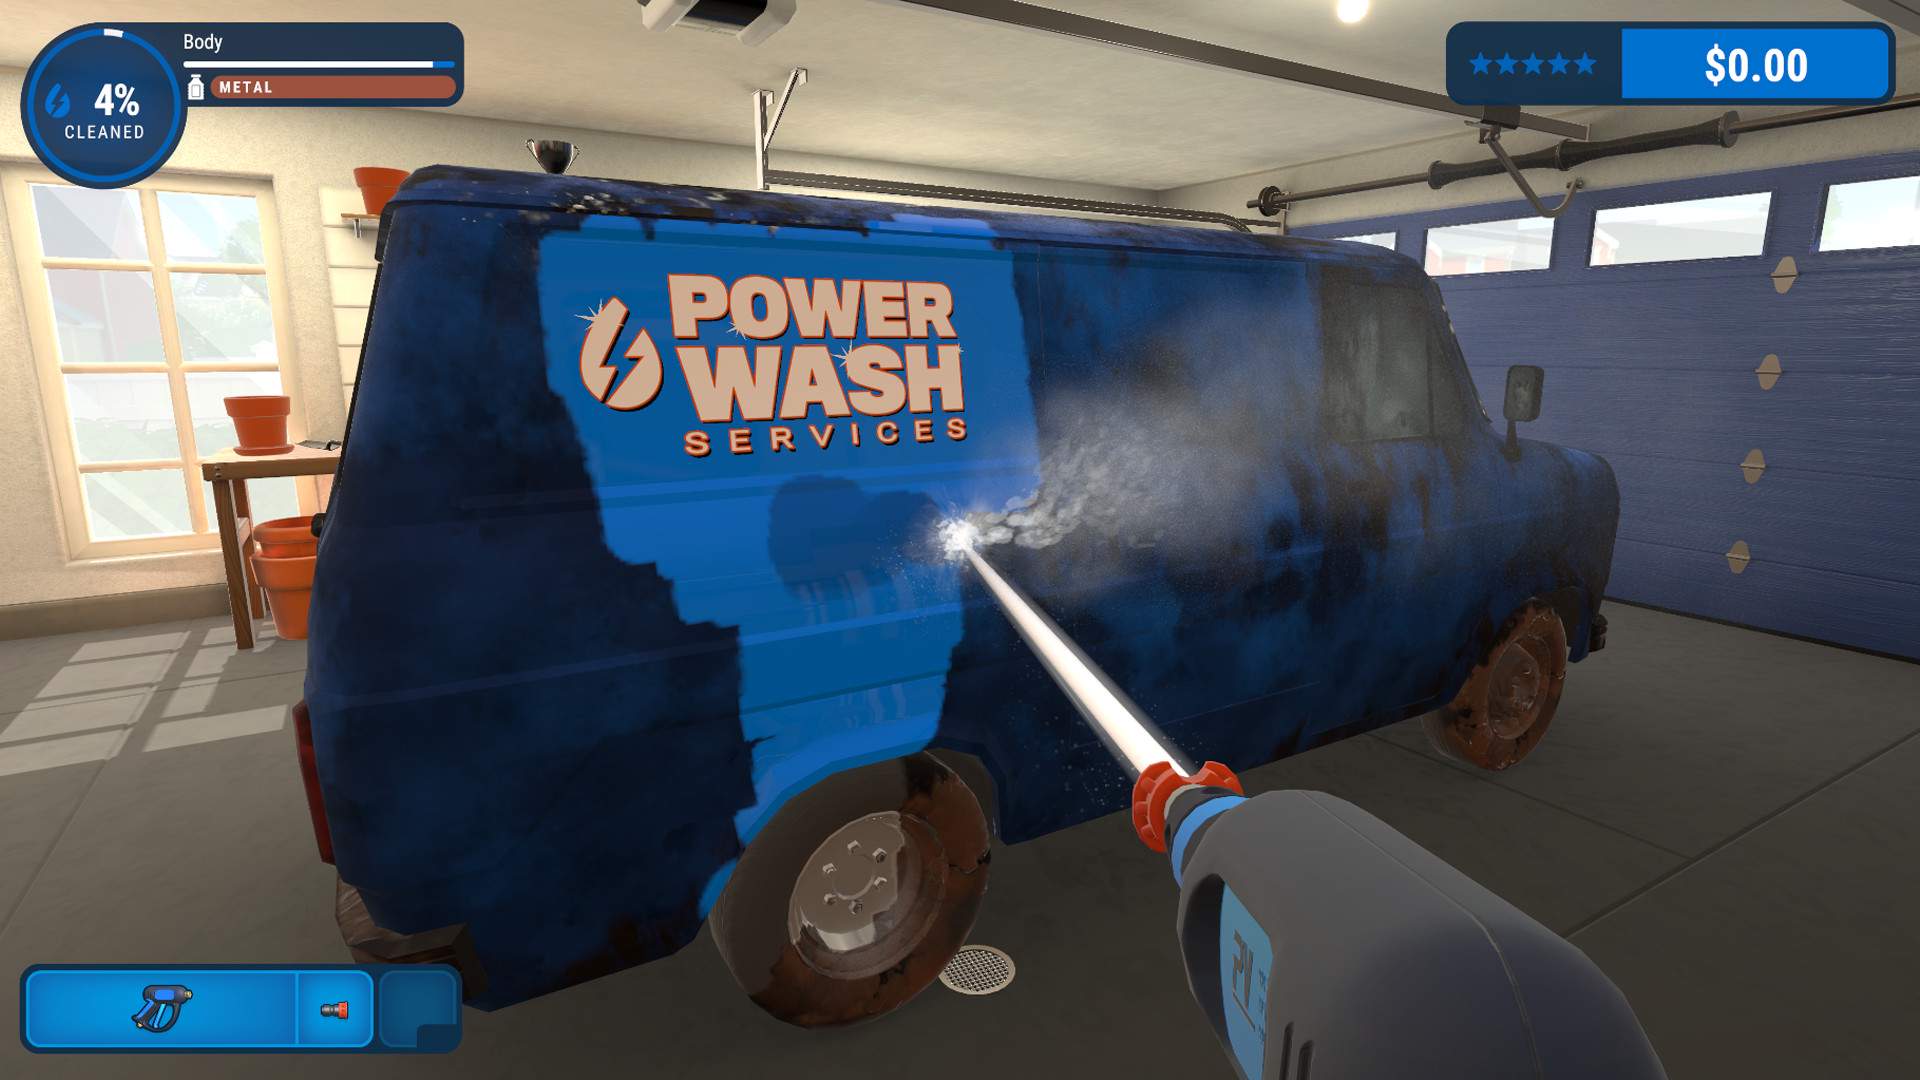 PowerWash Simulator out now on Xbox and PC Game Pass